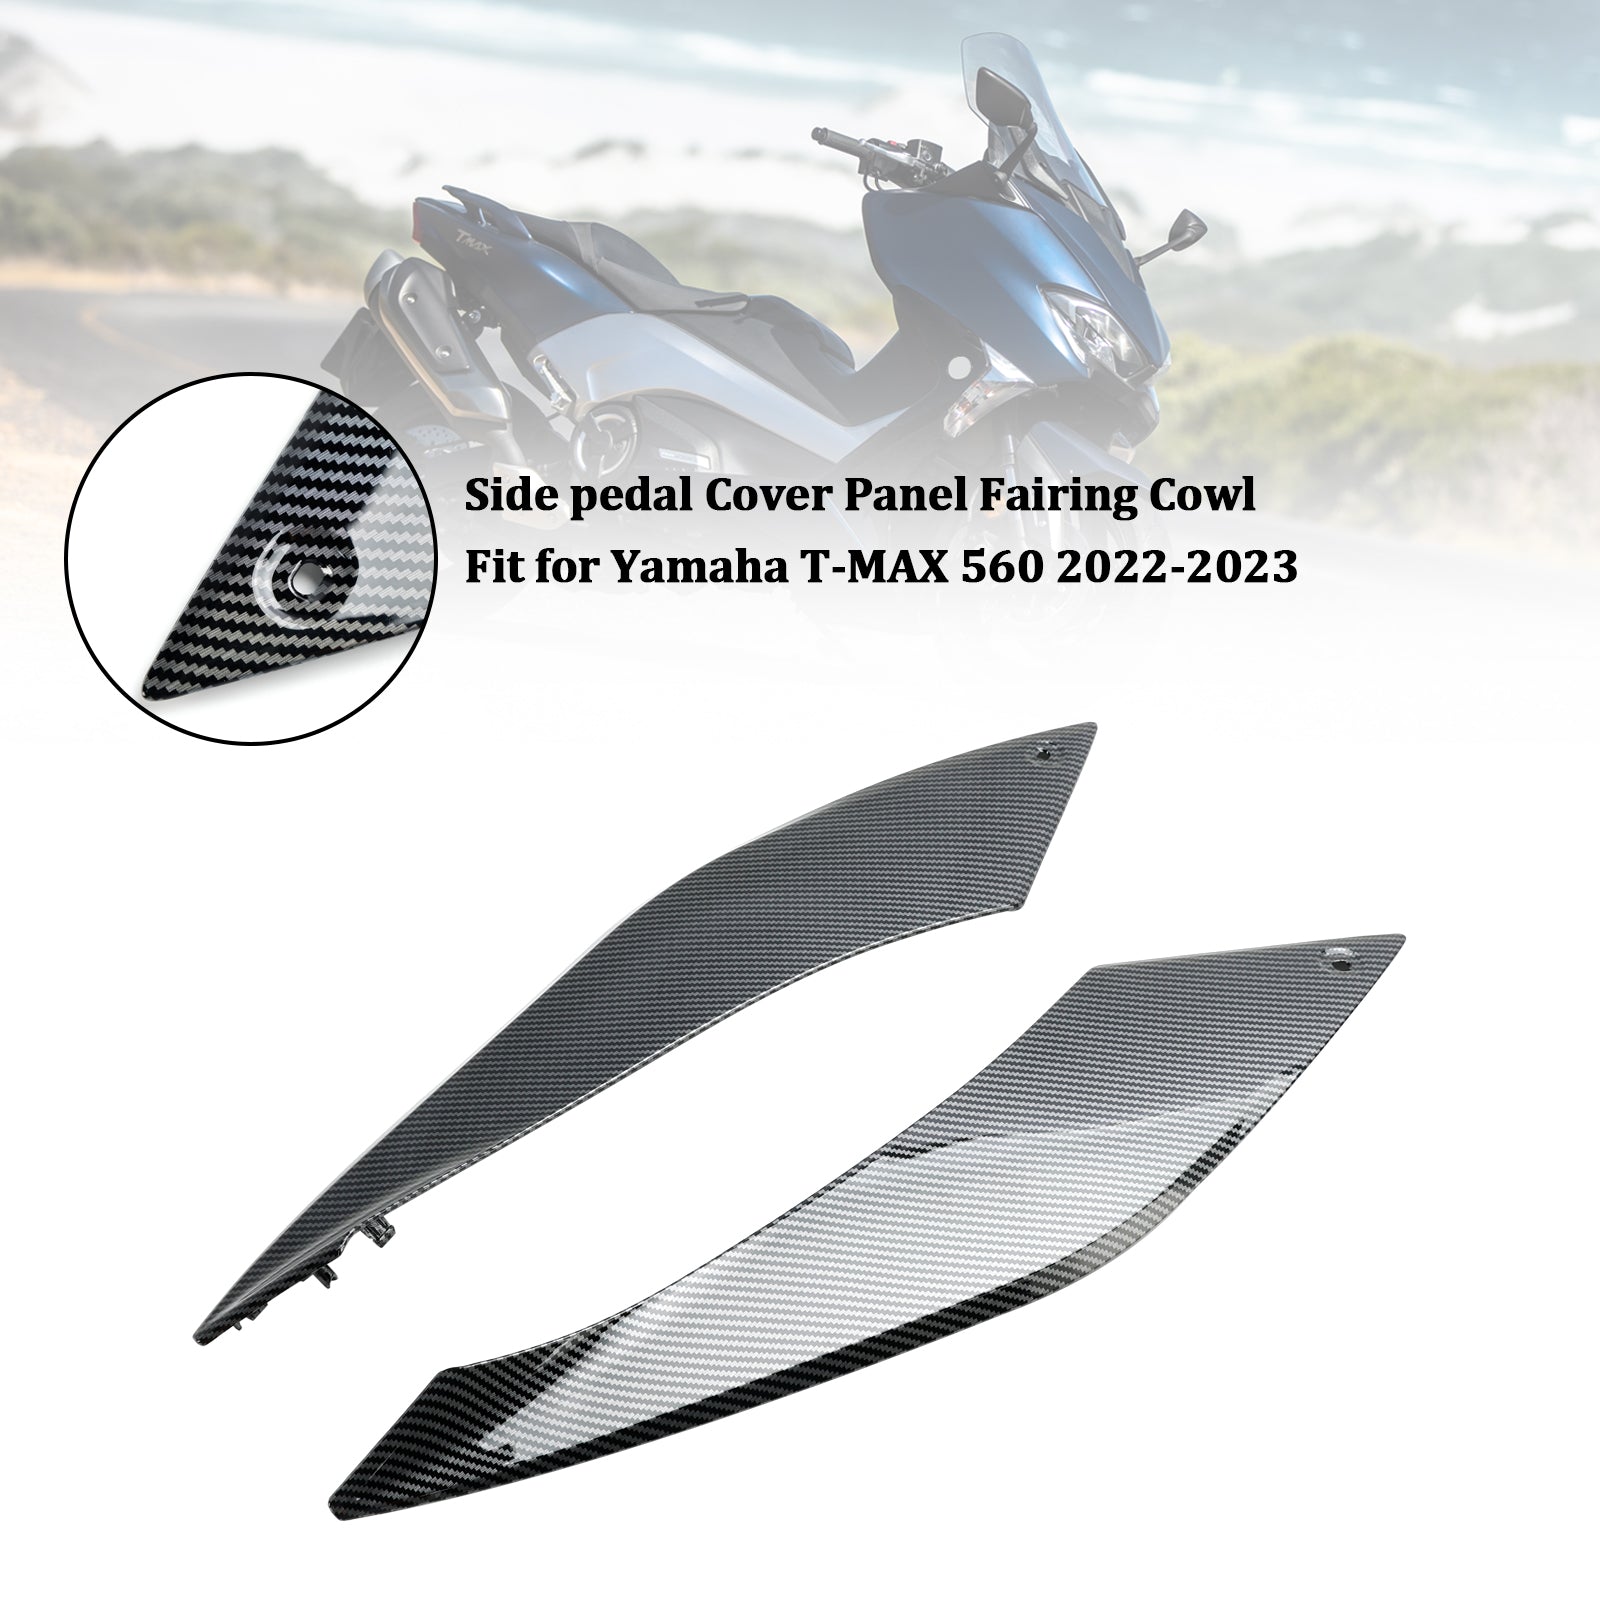 22-23 Yamaha T-MAX 560  Side pedal Cover Panel Fairing Cowl